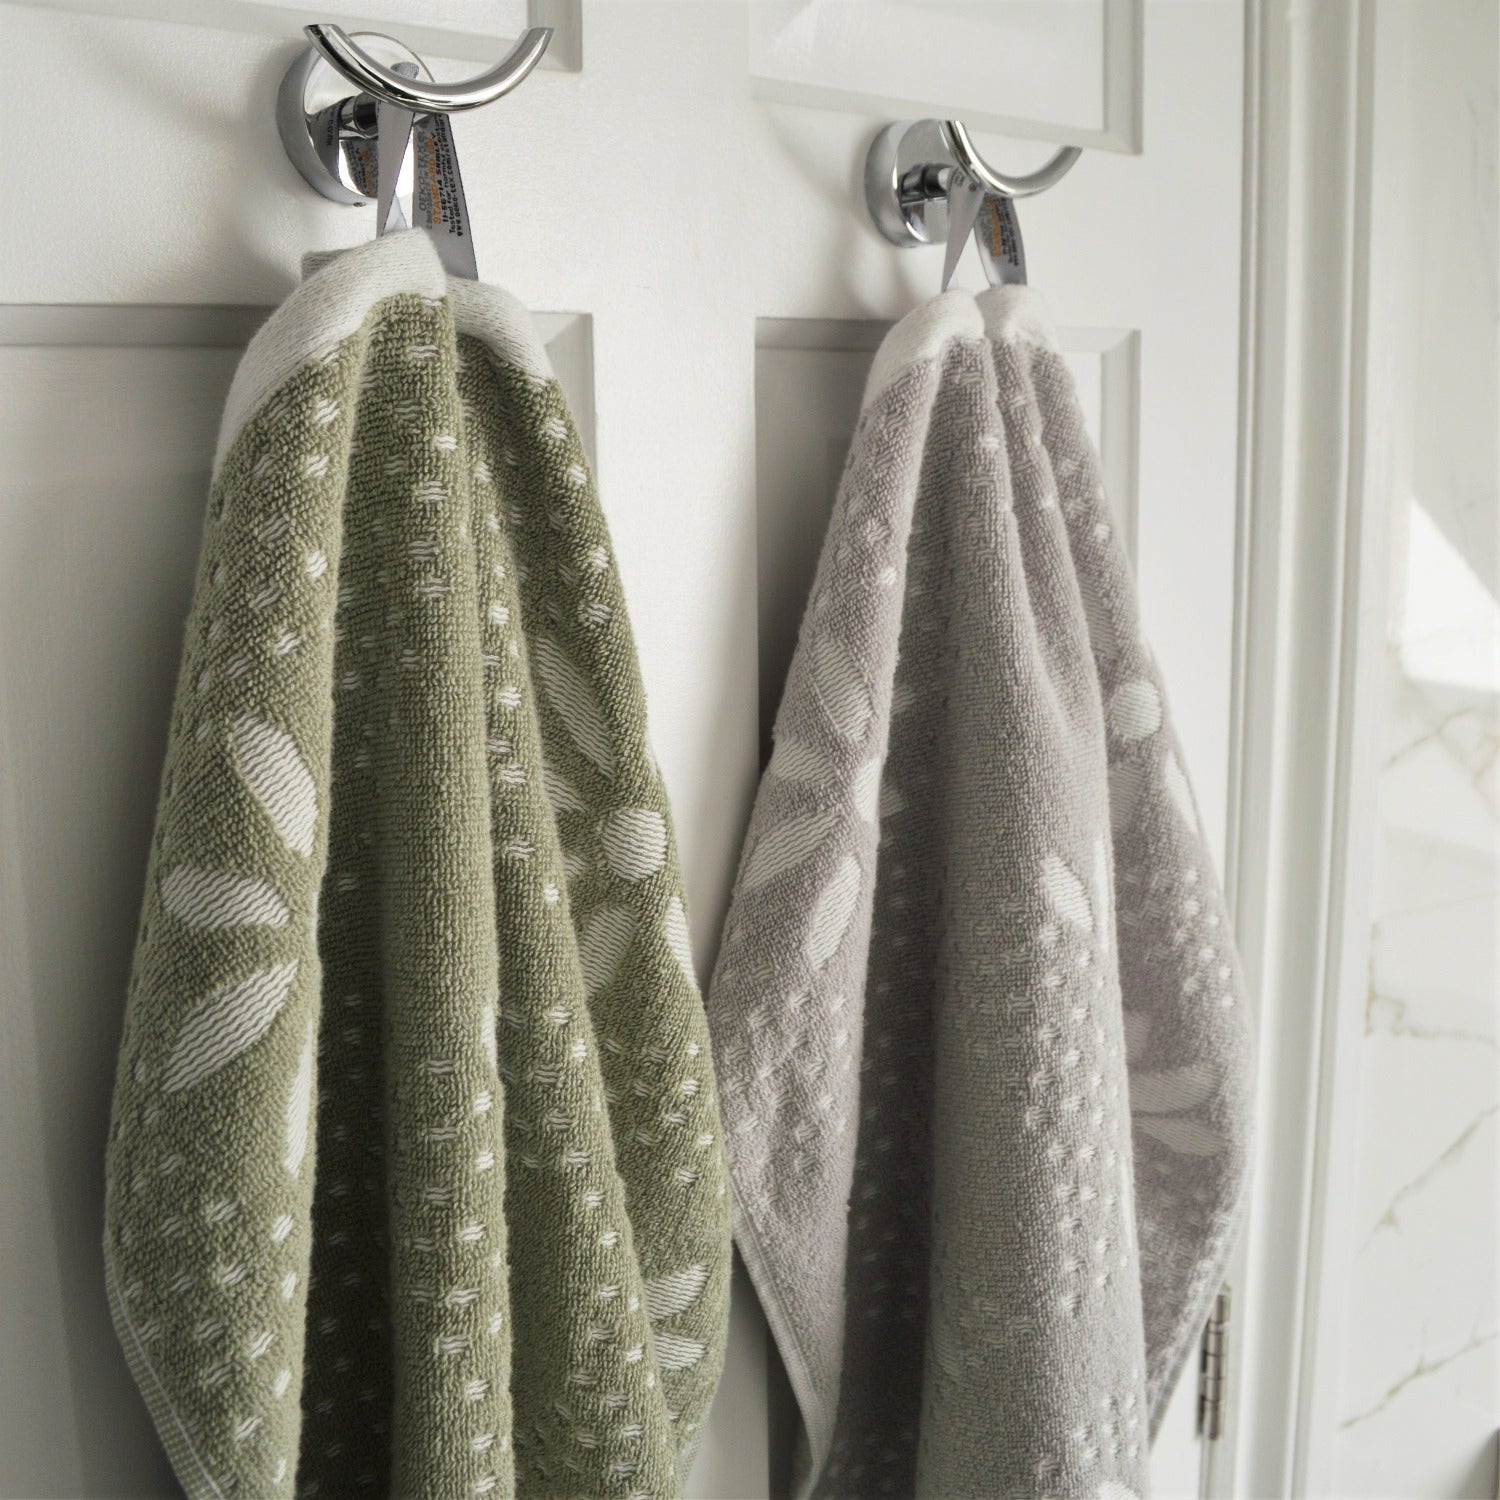 Patterned floral towels with hanging loops